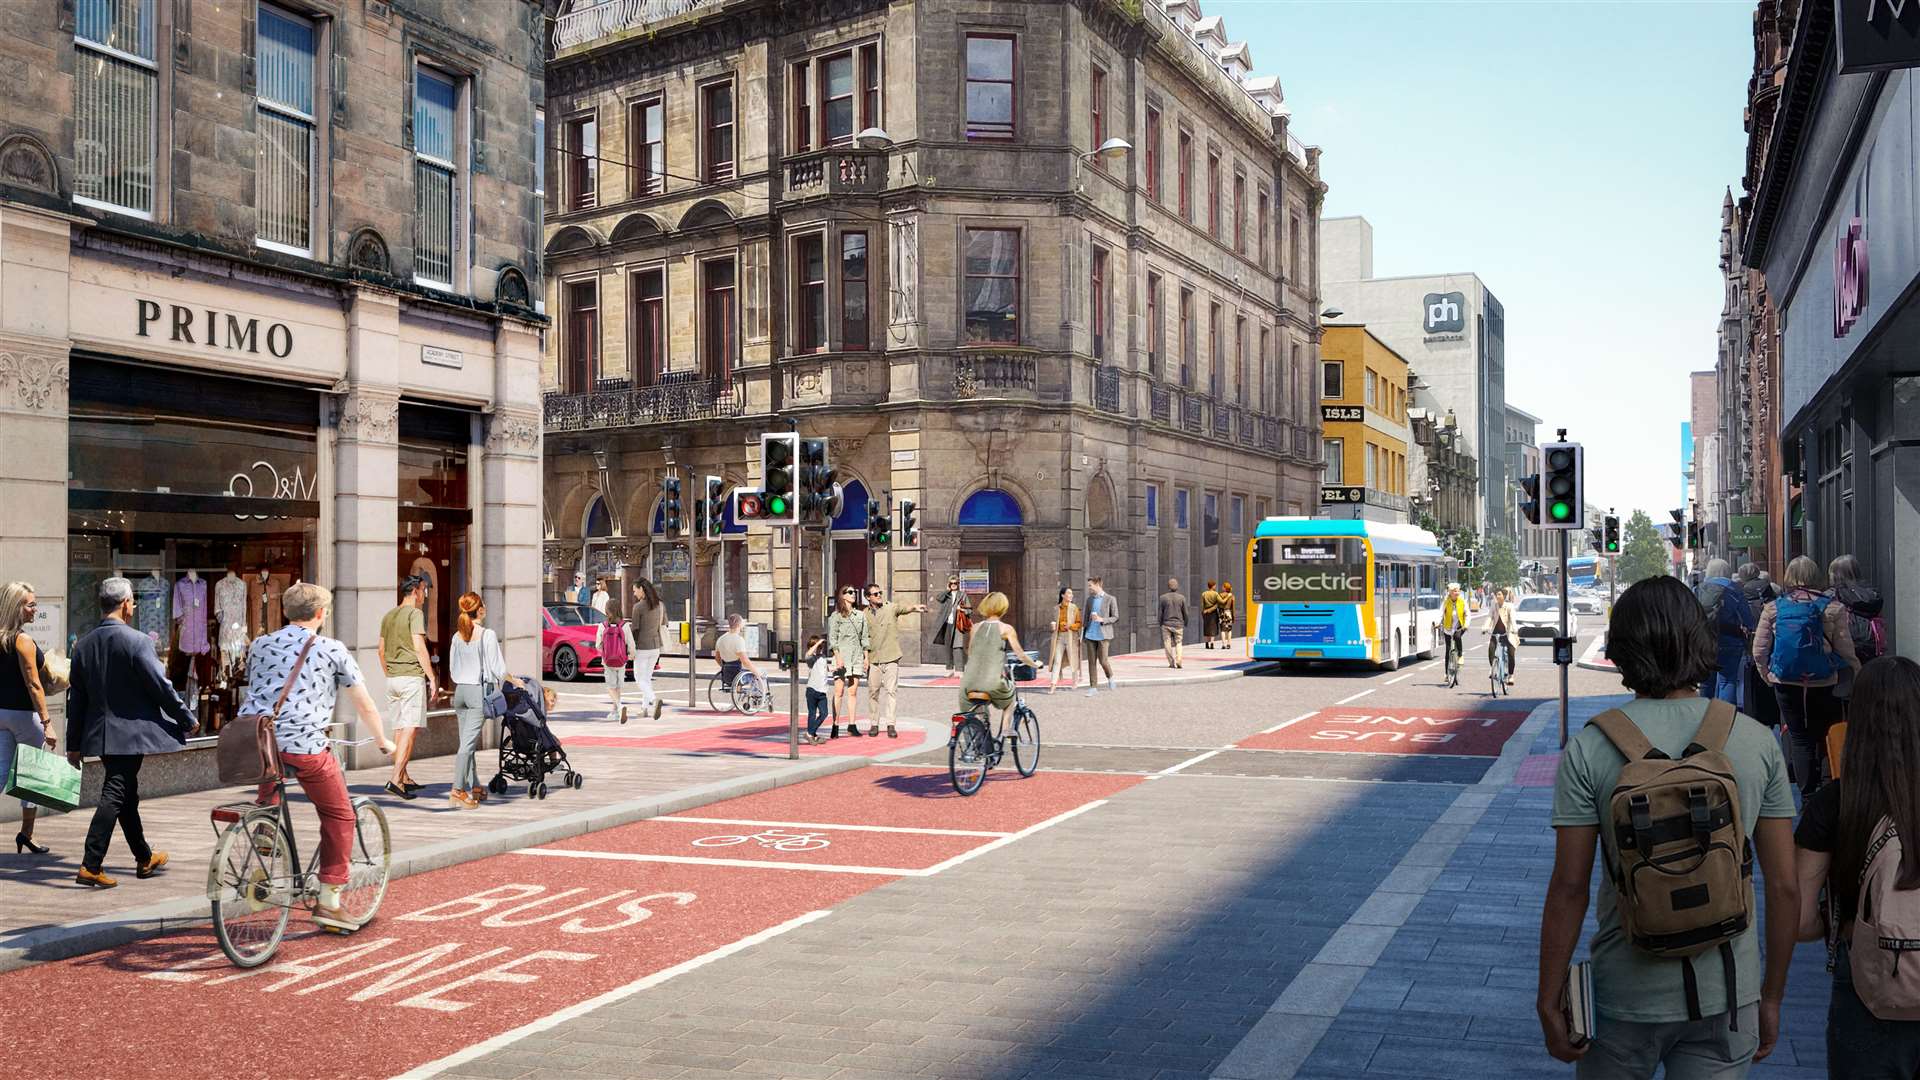 Artist impression of proposed Academy Street changes.